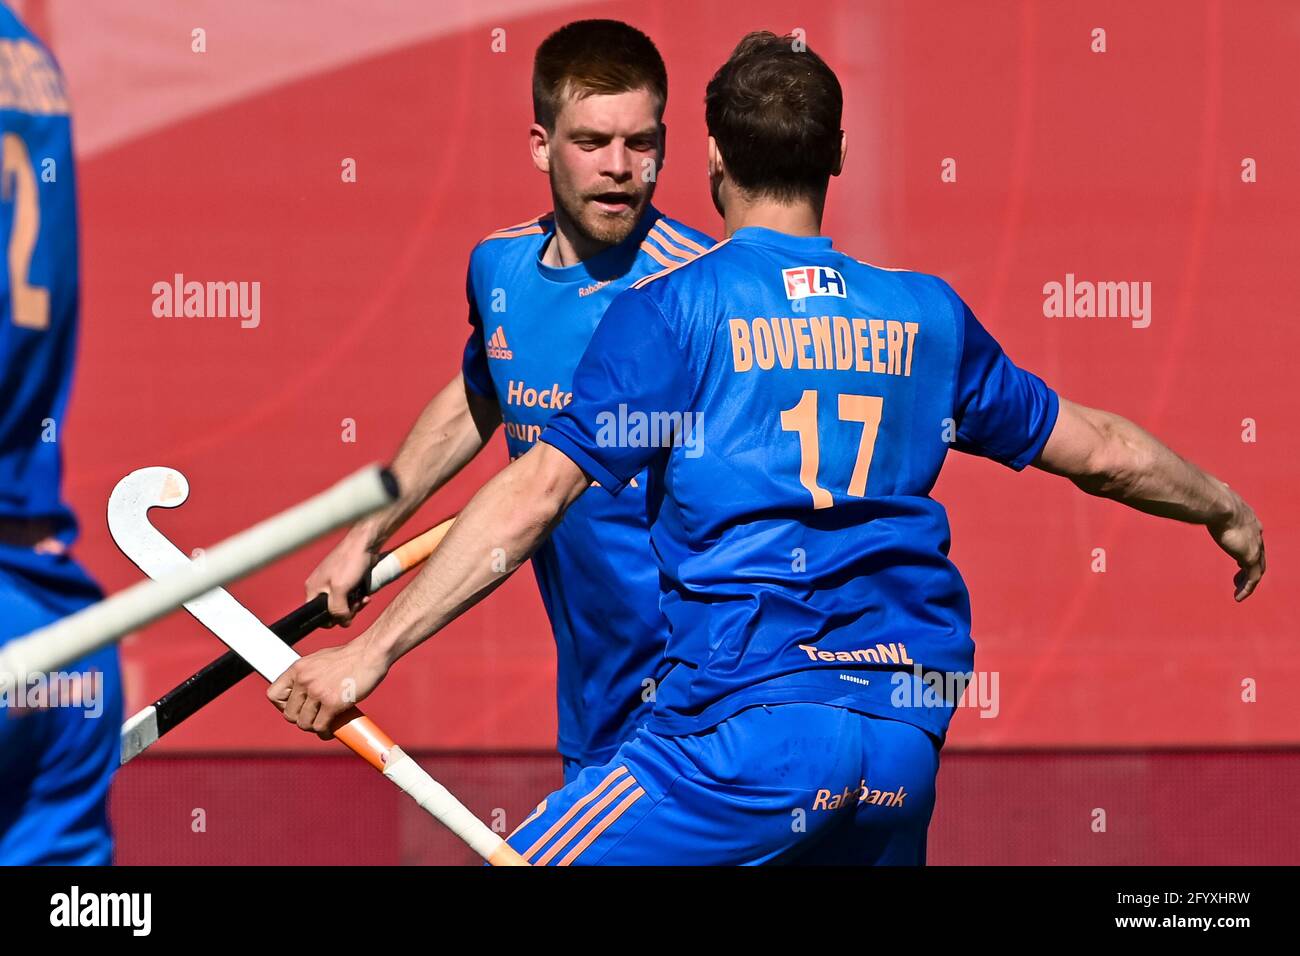 ANTWERP, BELGIUM - MAY 30: Thierry Brinkman of the Netherlands celebrates after scoring his sides fourth goal with Roel Bovendeert of the Netherlands during the Mens FIH Pro League match between Belgium and Netherlands at Sportcentrum Wilrijkse on May 30, 2021 in Antwerp, Belgium (Photo by Philippe de Putter/Orange Pictures) Stock Photo